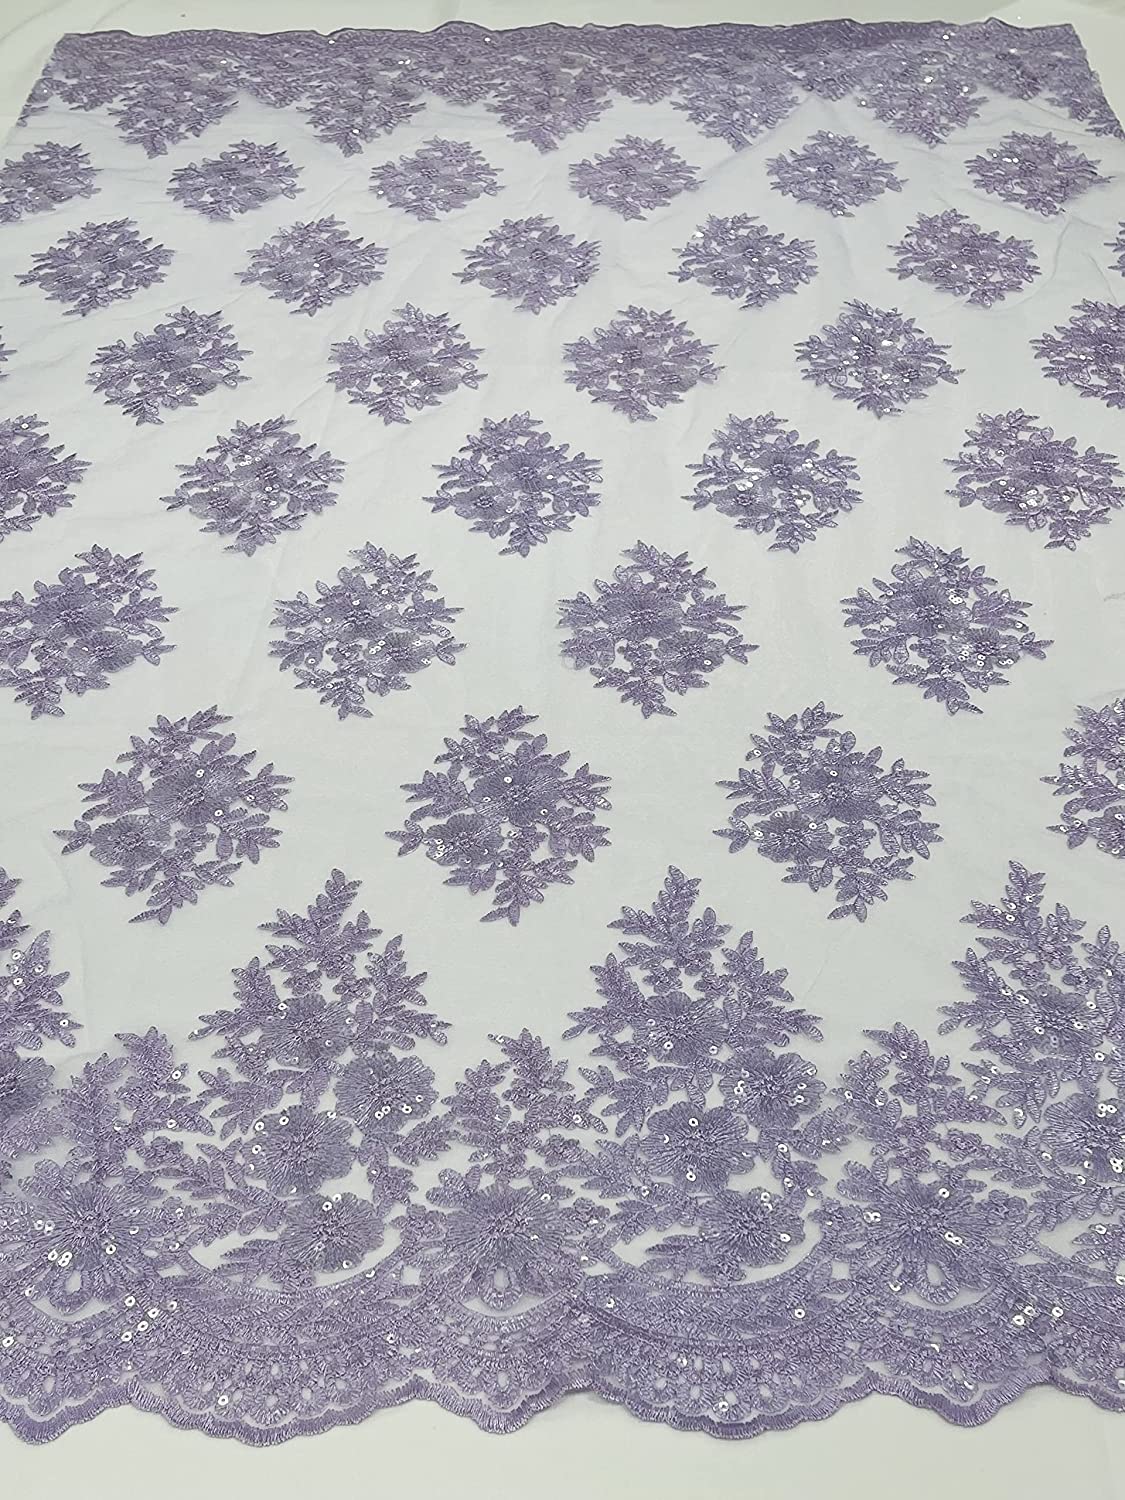 Emma Design Floral Corded Embroider with Sequins, Solid and with Glitter Mesh Lace Fabric (1 Yard, Solid Mesh Lavender)